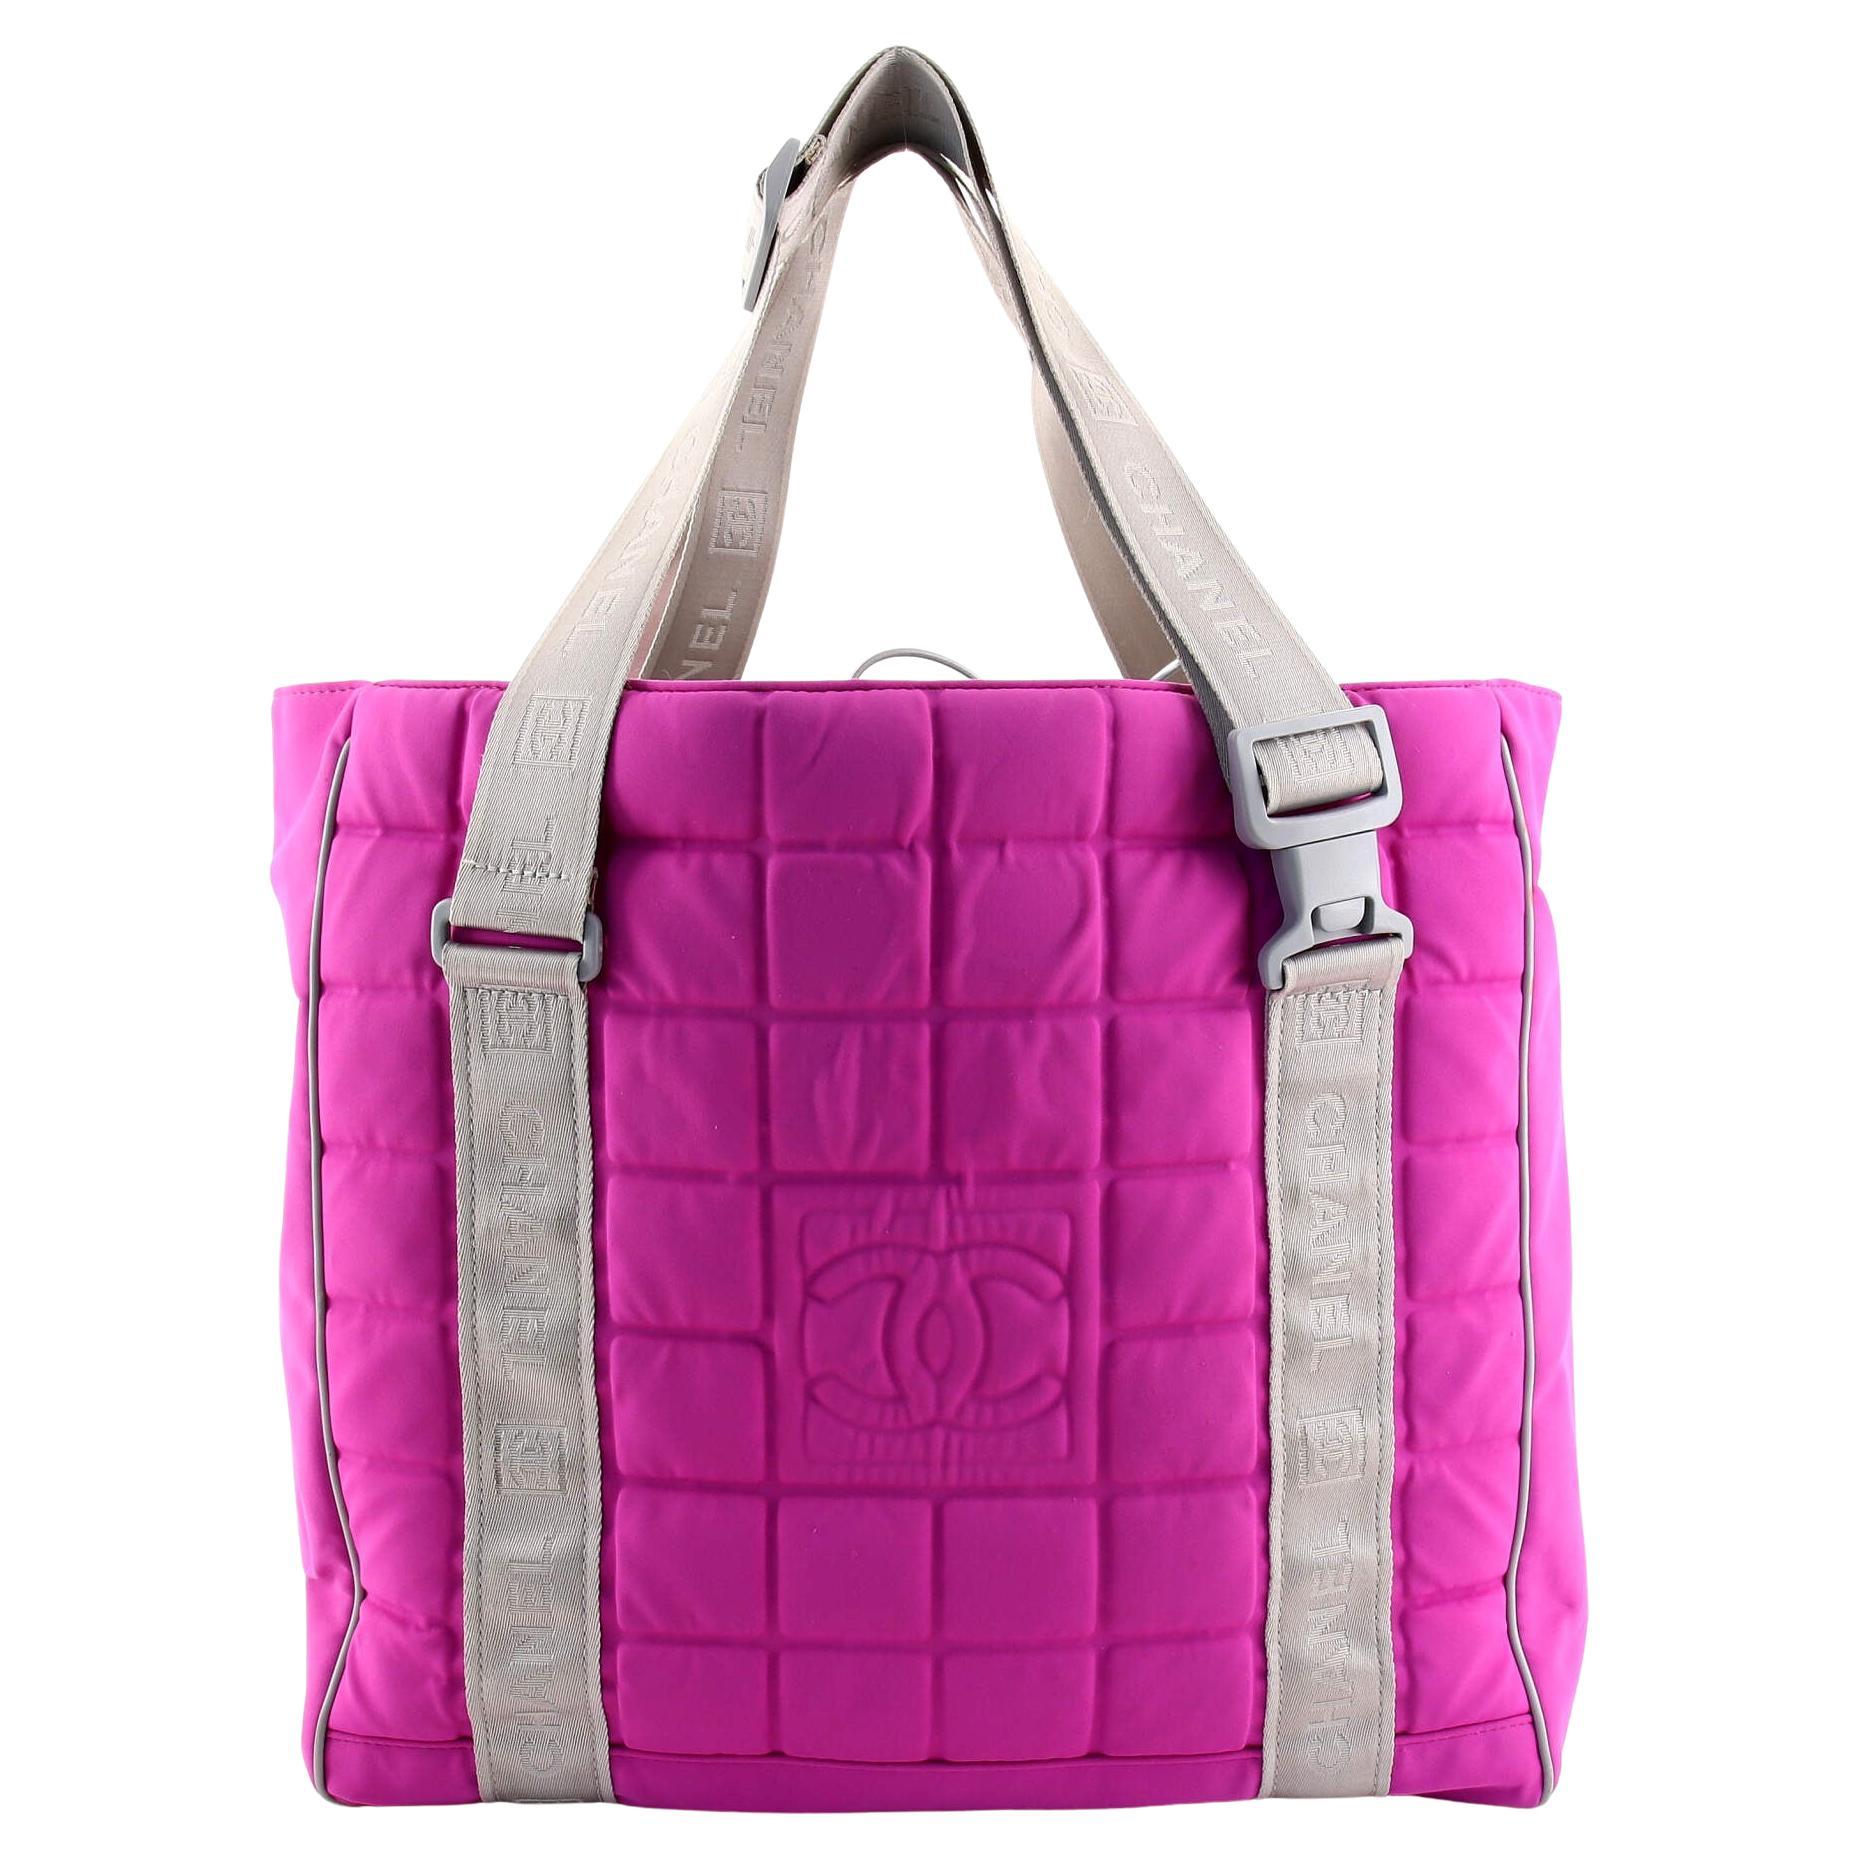 CHANEL, Bags, Authentic Chanel Sports Line Chocolate Bar Tote Bag Canvas  Purple Pink